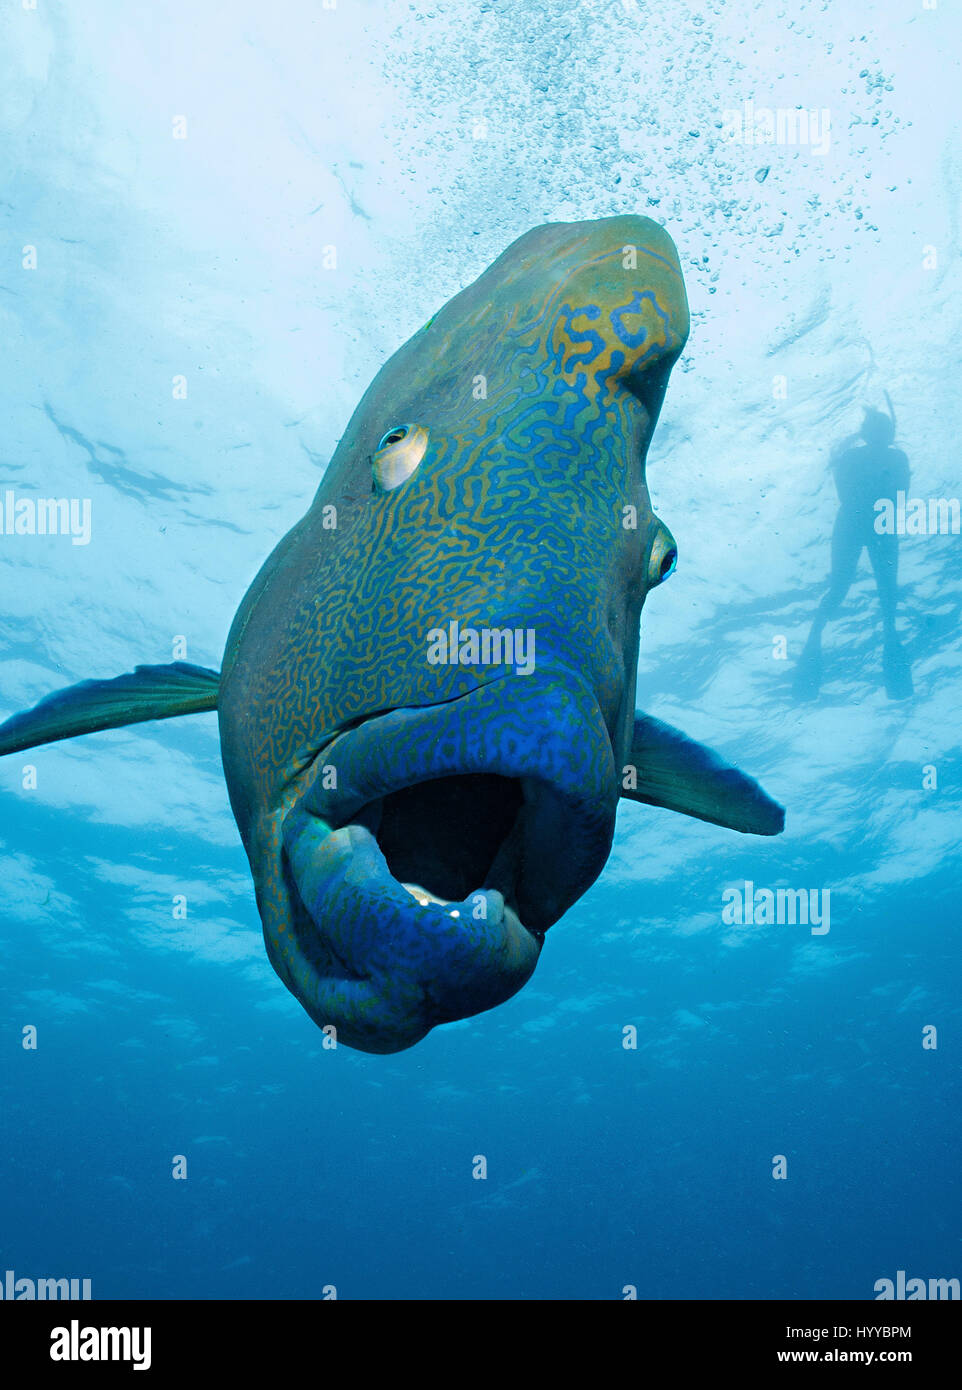 Giant fish with his mouth wide open. JAW-DROPPING role reversal pictures appear to show a huge five-foot-long fish swallowing a diver for his lunch. The diver’s legs look like they were dangling out of 330-pound Napoleon wrasse’s mouth as it attempts to gobble him whole, but in fact the lucky diver was actually behind the wrasse. Other spectacular shots show another diver’s head appear to poke of out the large fish’s mouth as the photographer created another eye-boggling optical illusion. The wrasse, which divers named Wally, seemed to enjoy human interaction and is pictured playing around wit Stock Photo